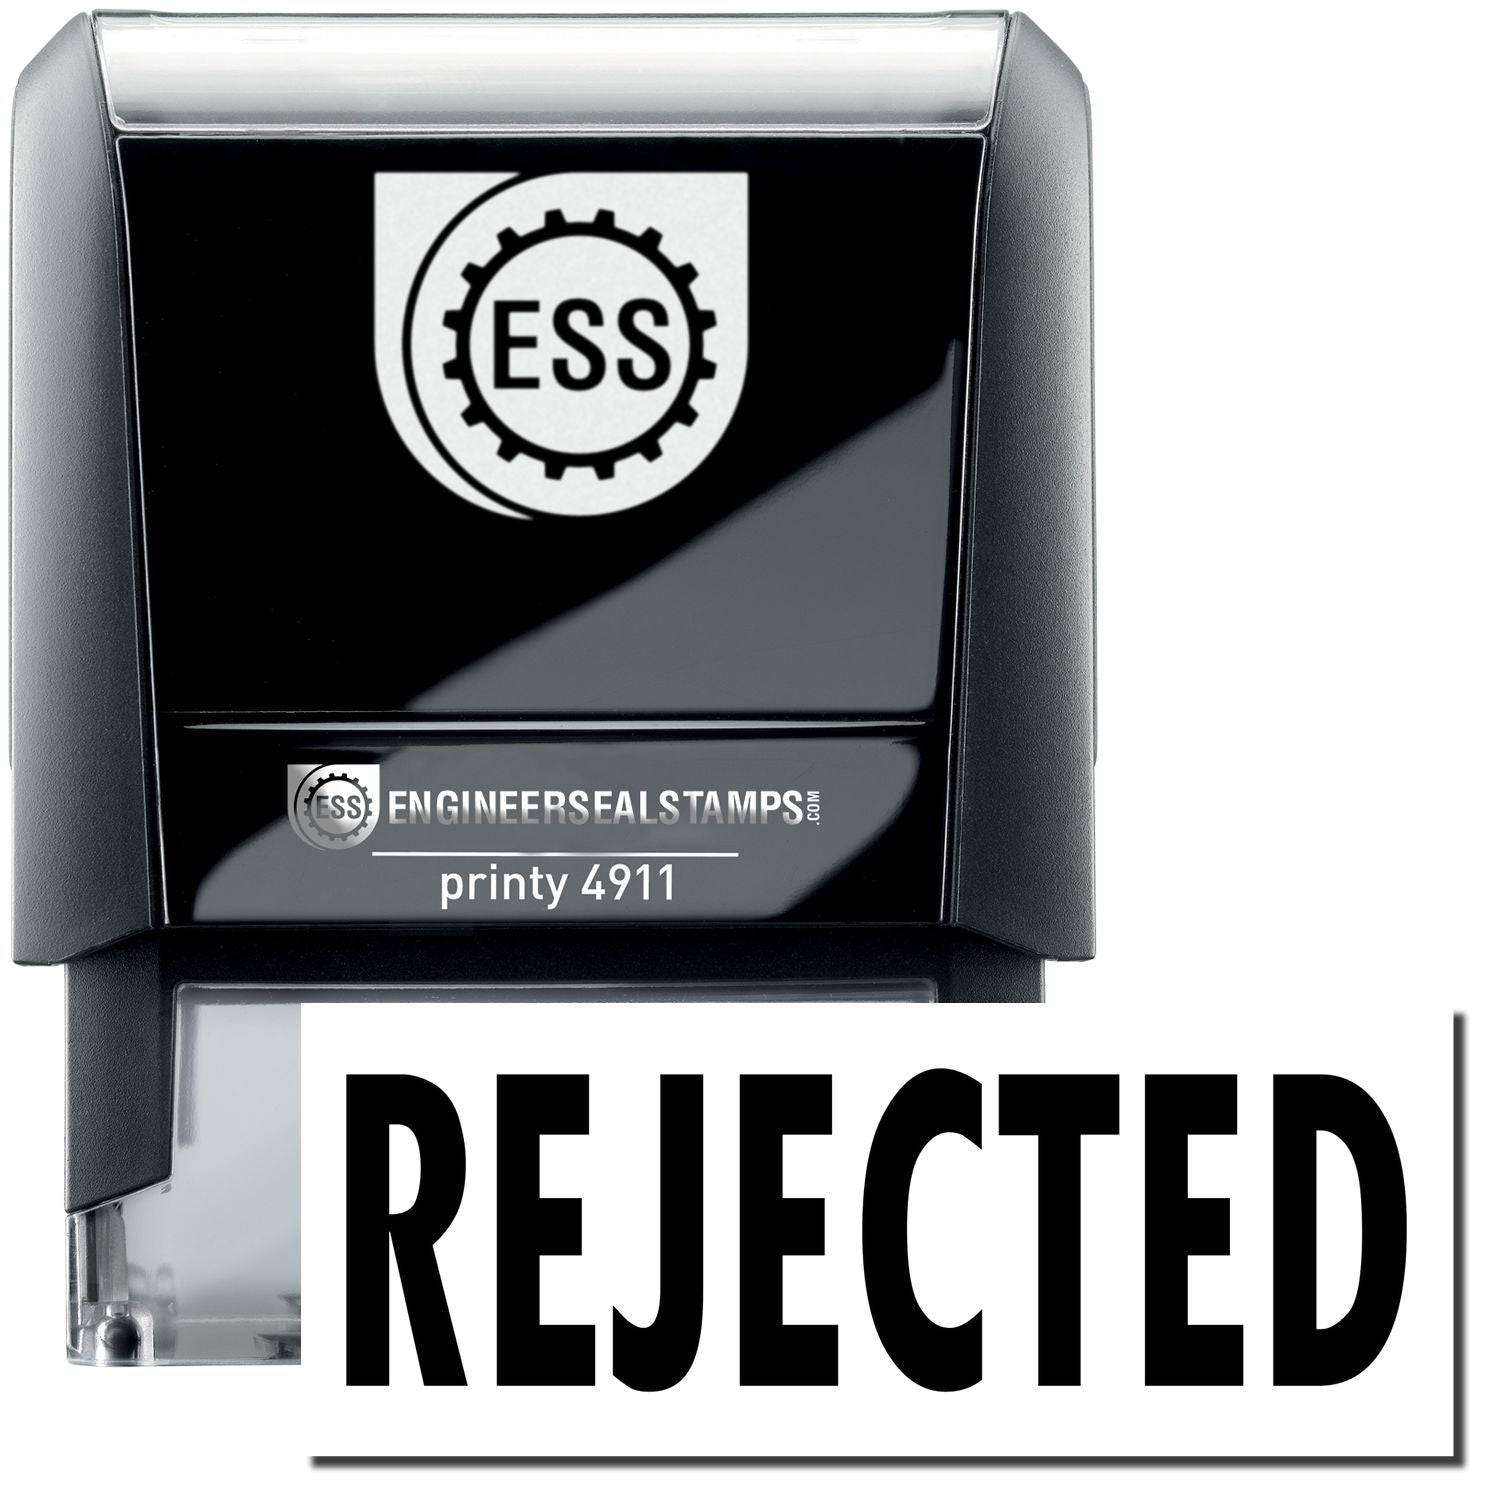 A self-inking stamp with a stamped image showing how the text "REJECTED" is displayed after stamping.